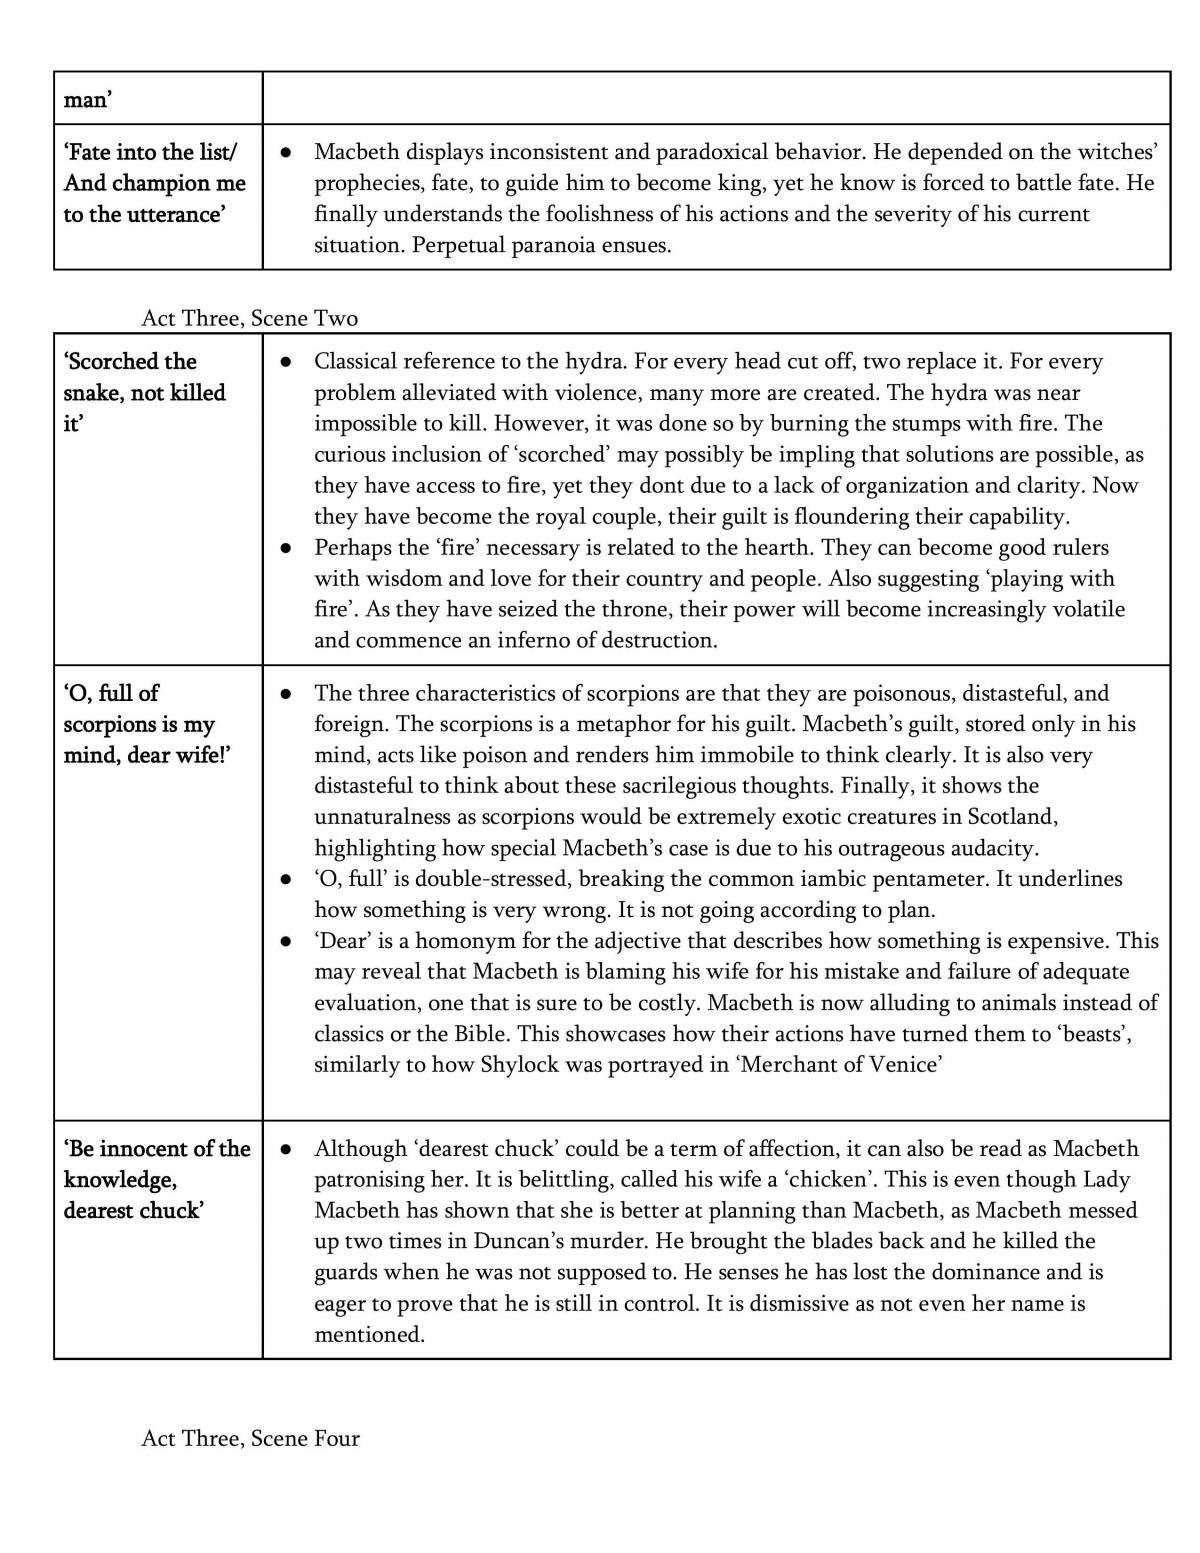 Macbeth NCEA Level 2 Written Text Full study notes - Page 15